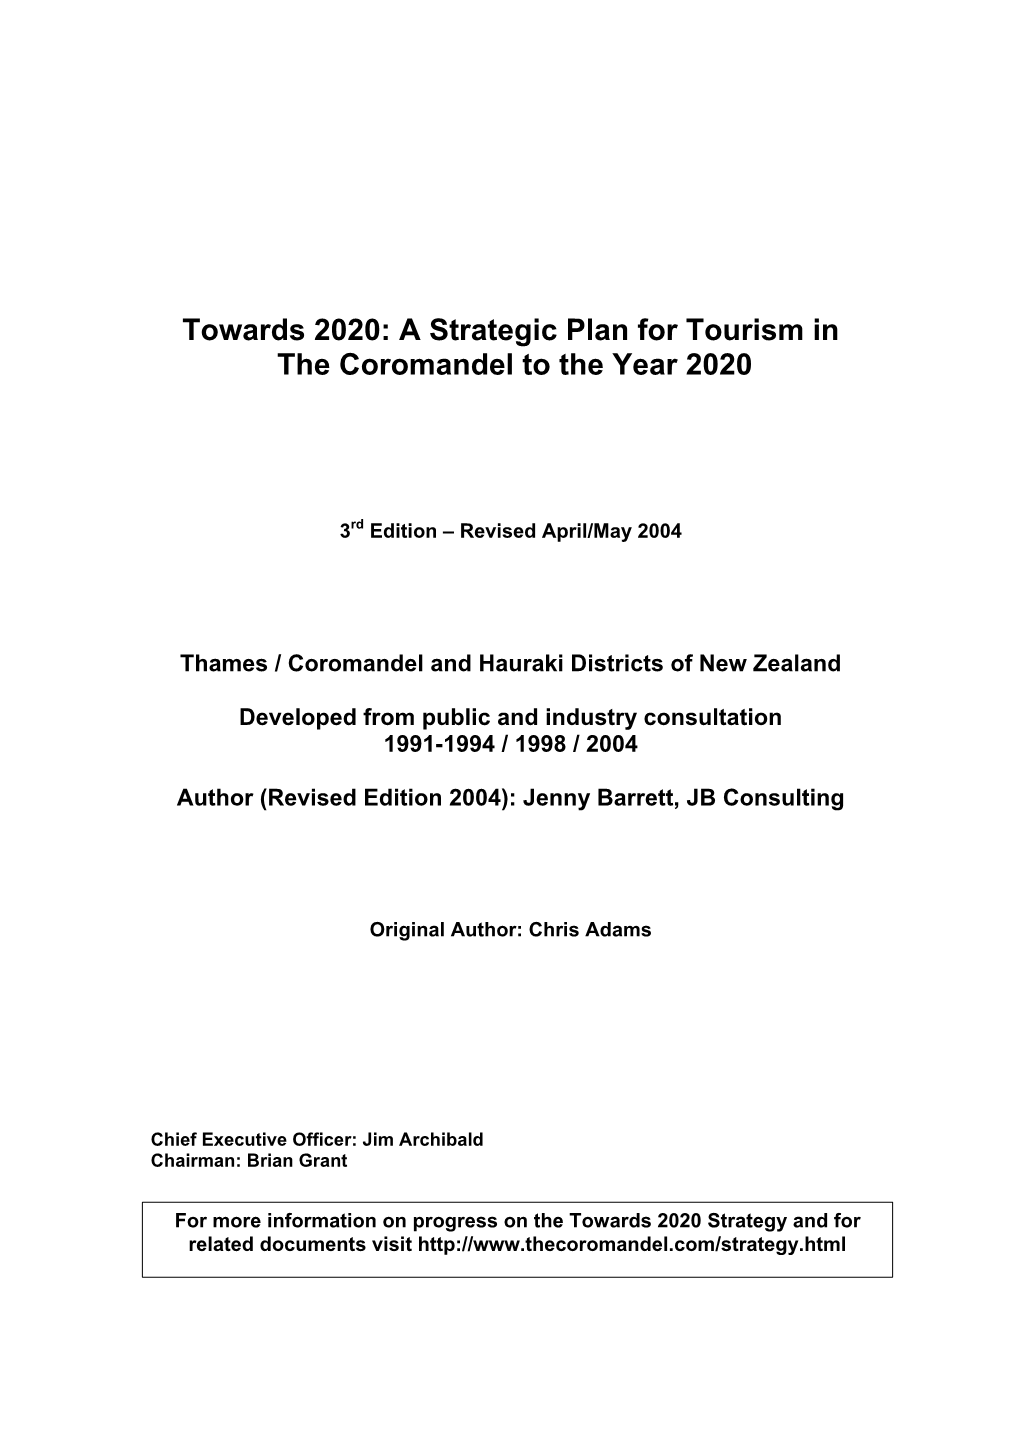 A Strategic Plan for Tourism in the Coromandel to the Year 2020